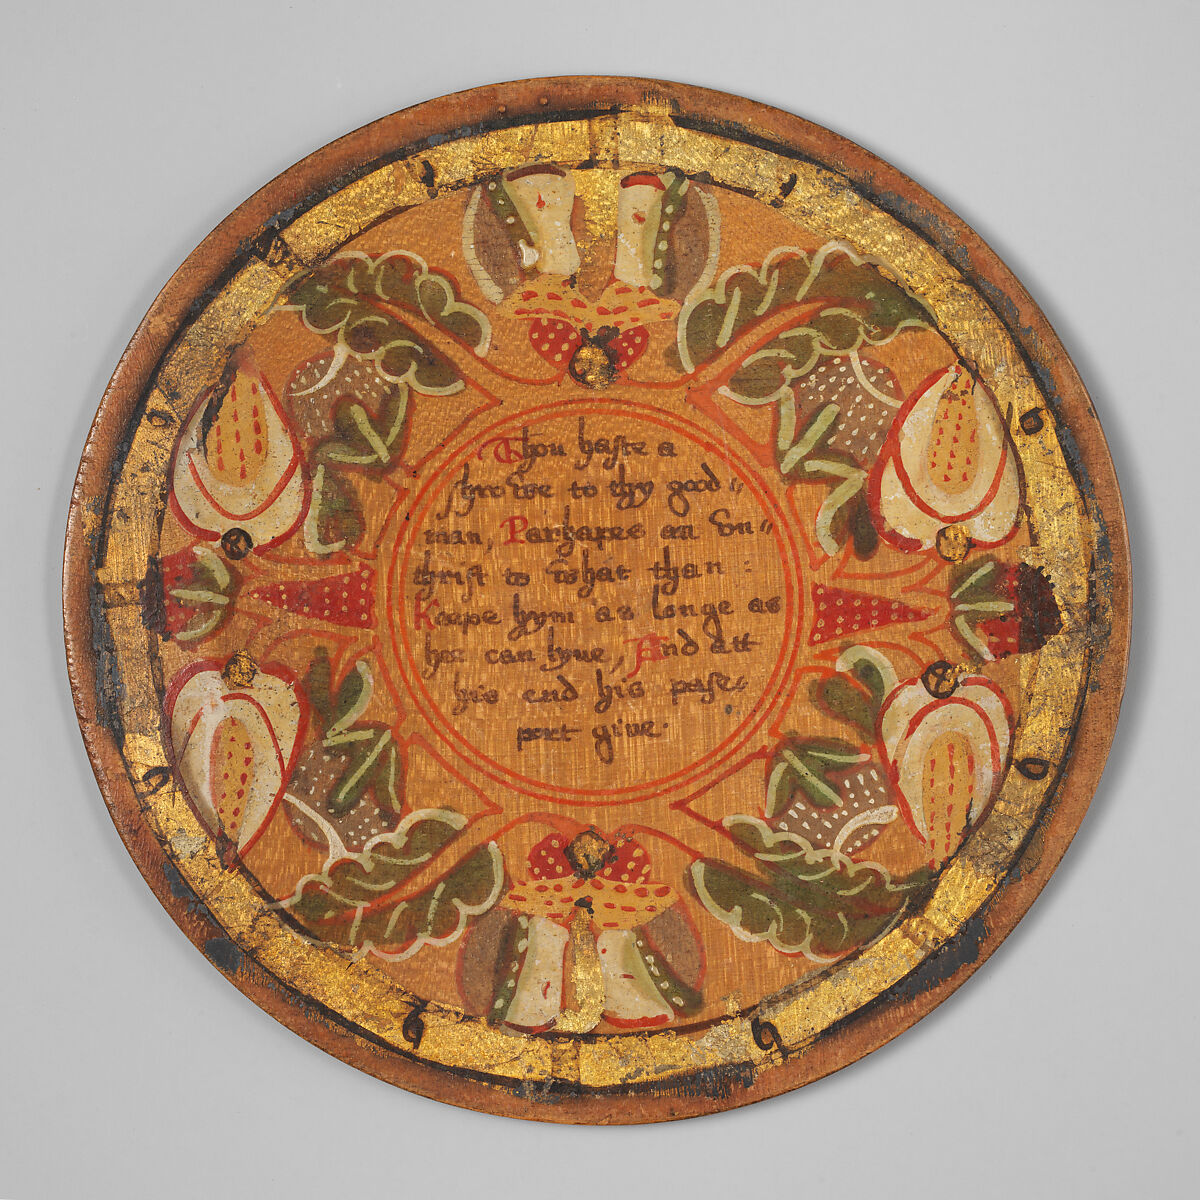 Trencher (one of a set), Oak and sycamore woods, painted, silvered and yellow varnished; inscription: ink (animal or vegetable), British 